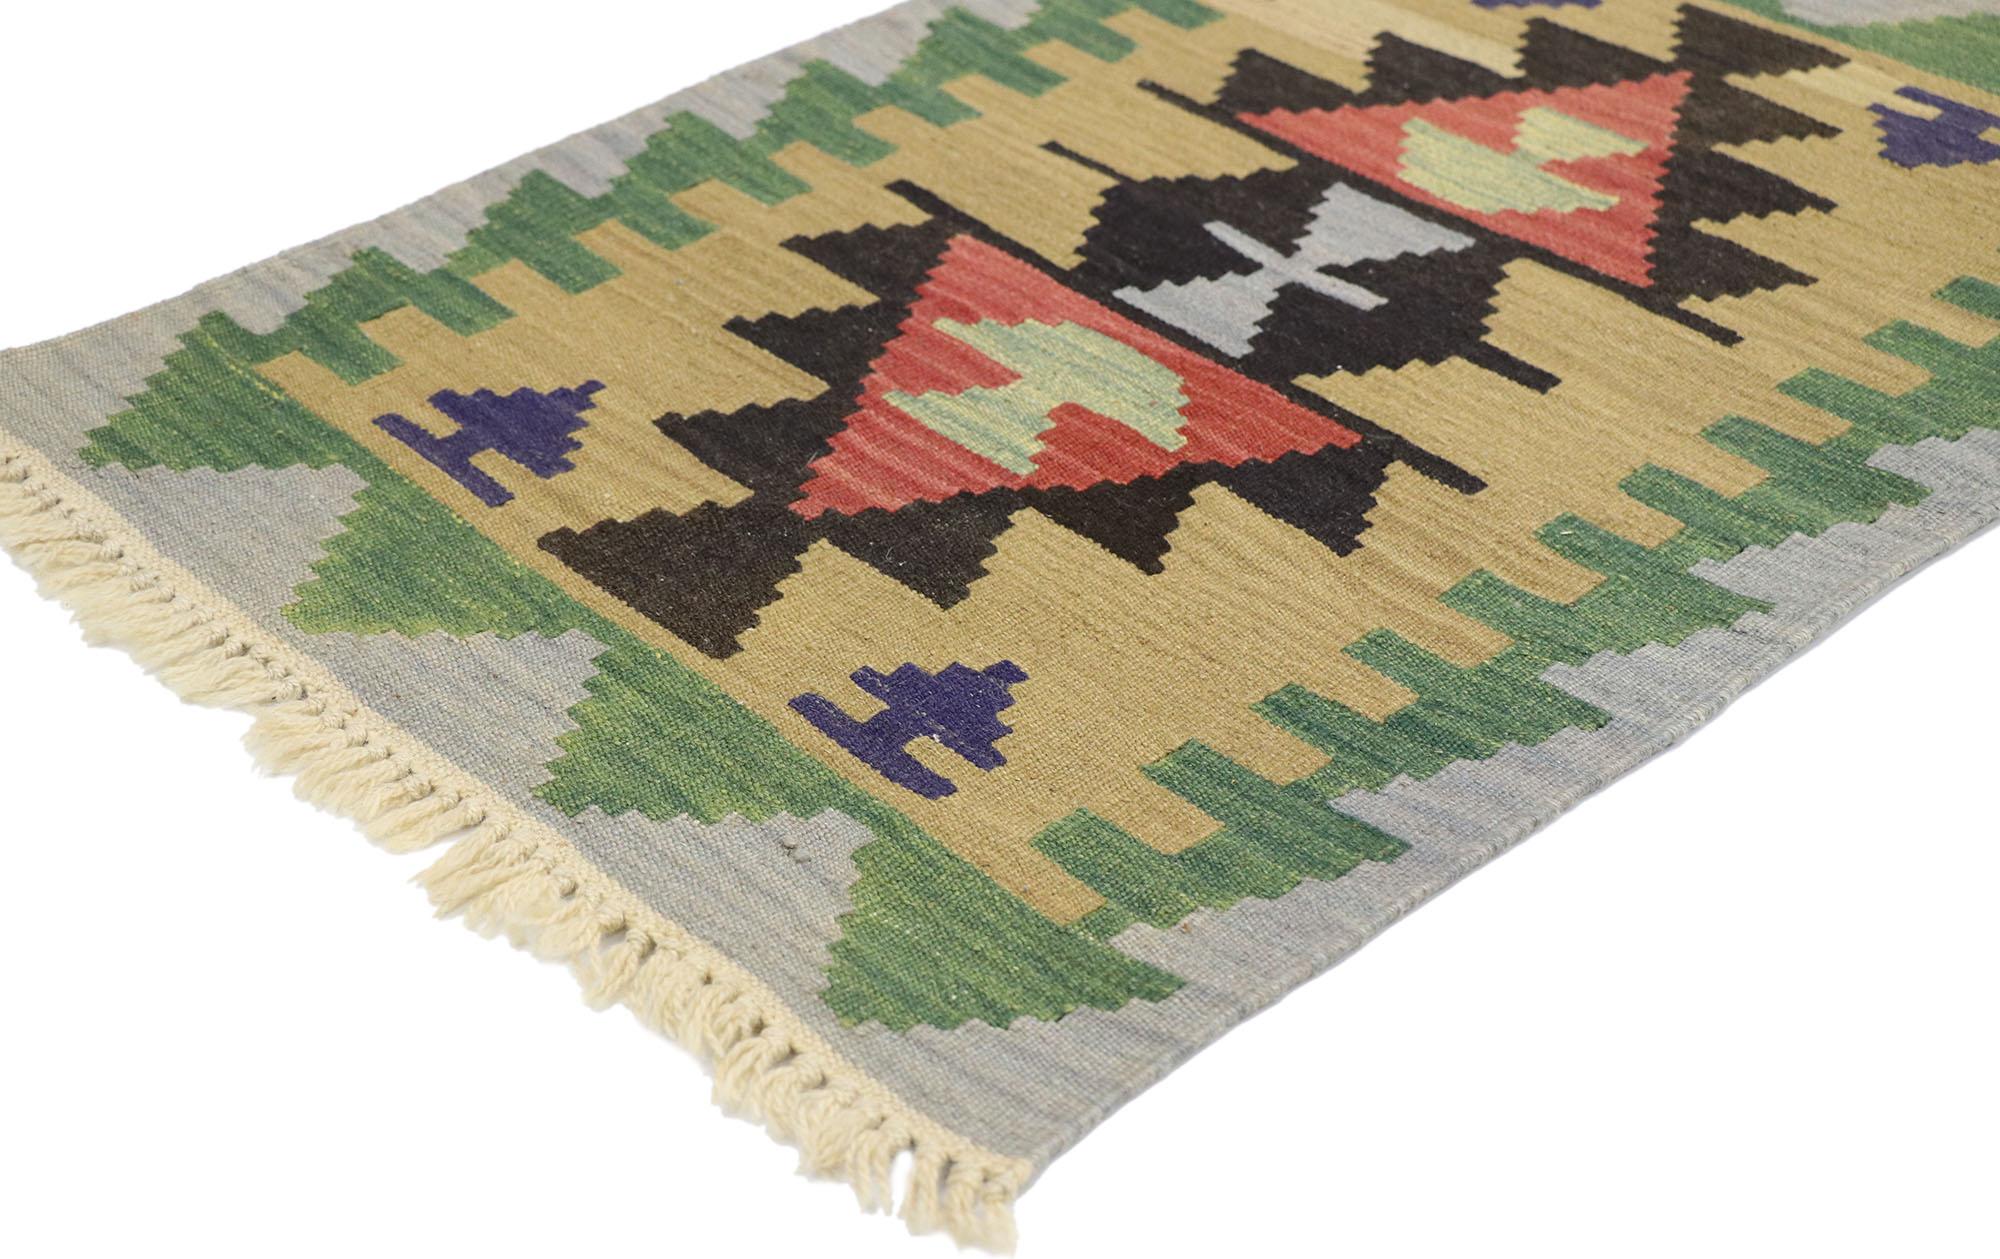 77906 vintage Persian Shiraz Kilim rug with Boho Chic Tribal style 01'11 x 02'11. Full of tiny details and a bold expressive design combined with vibrant colors and tribal style, this hand-woven wool vintage Persian Shiraz kilim rug is a captivating